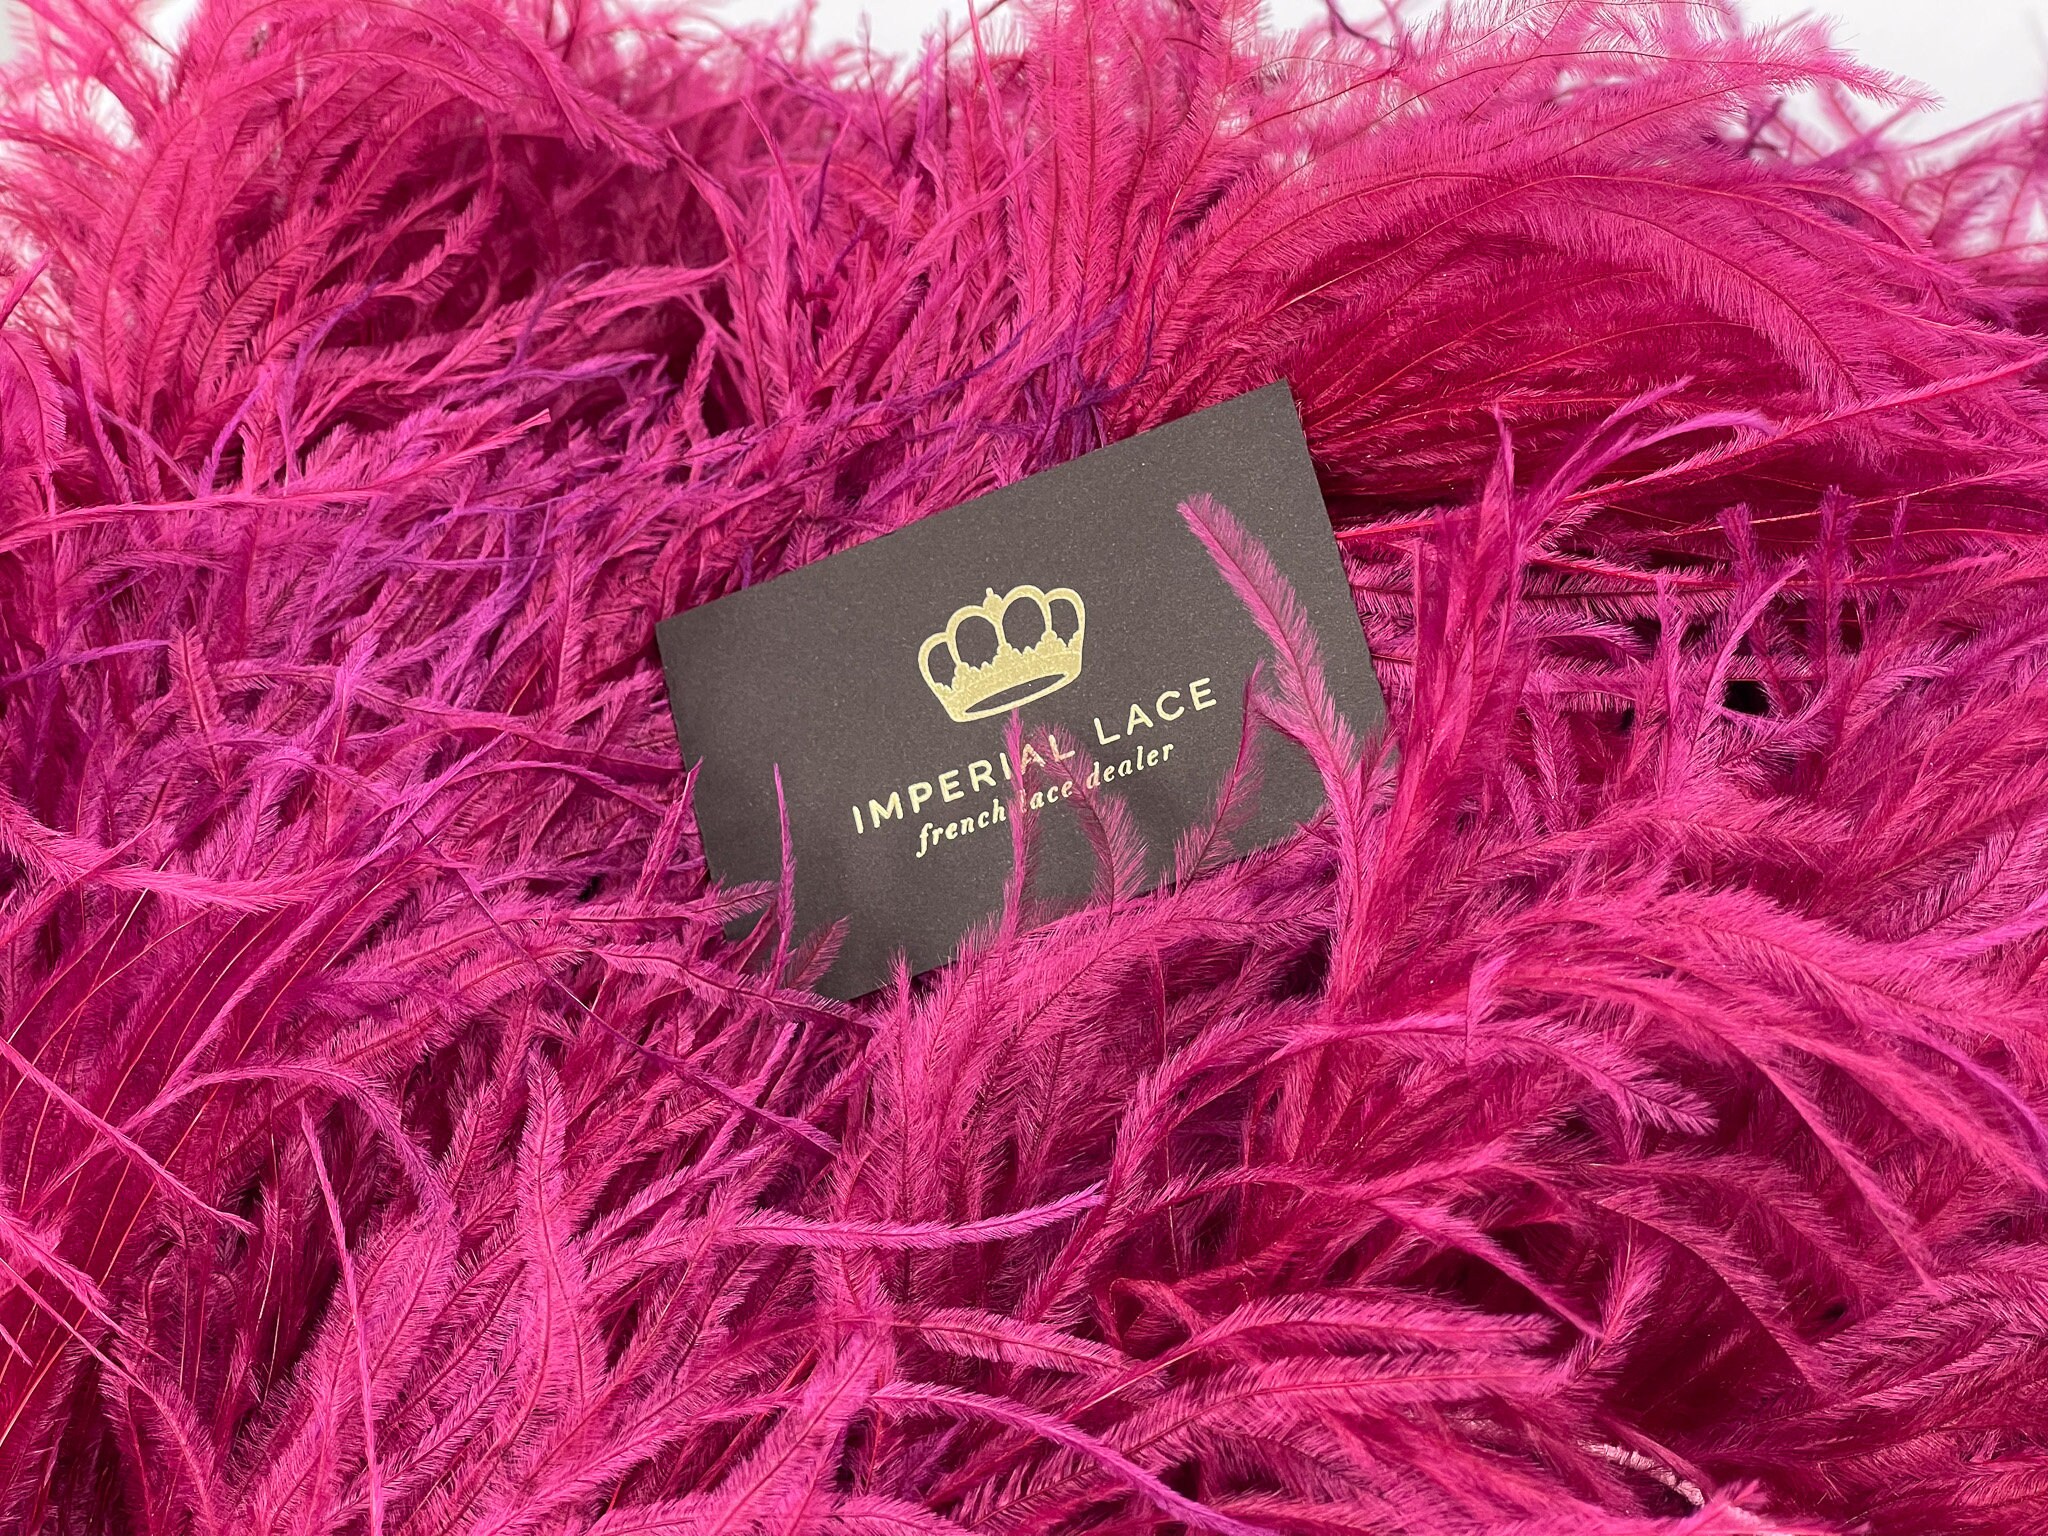 Bright Pink Feather Craft Supplies Pink Magenta Feathers for Crafts Vibrant  Neon Colorful Craft Feathers Decorations Qty12 